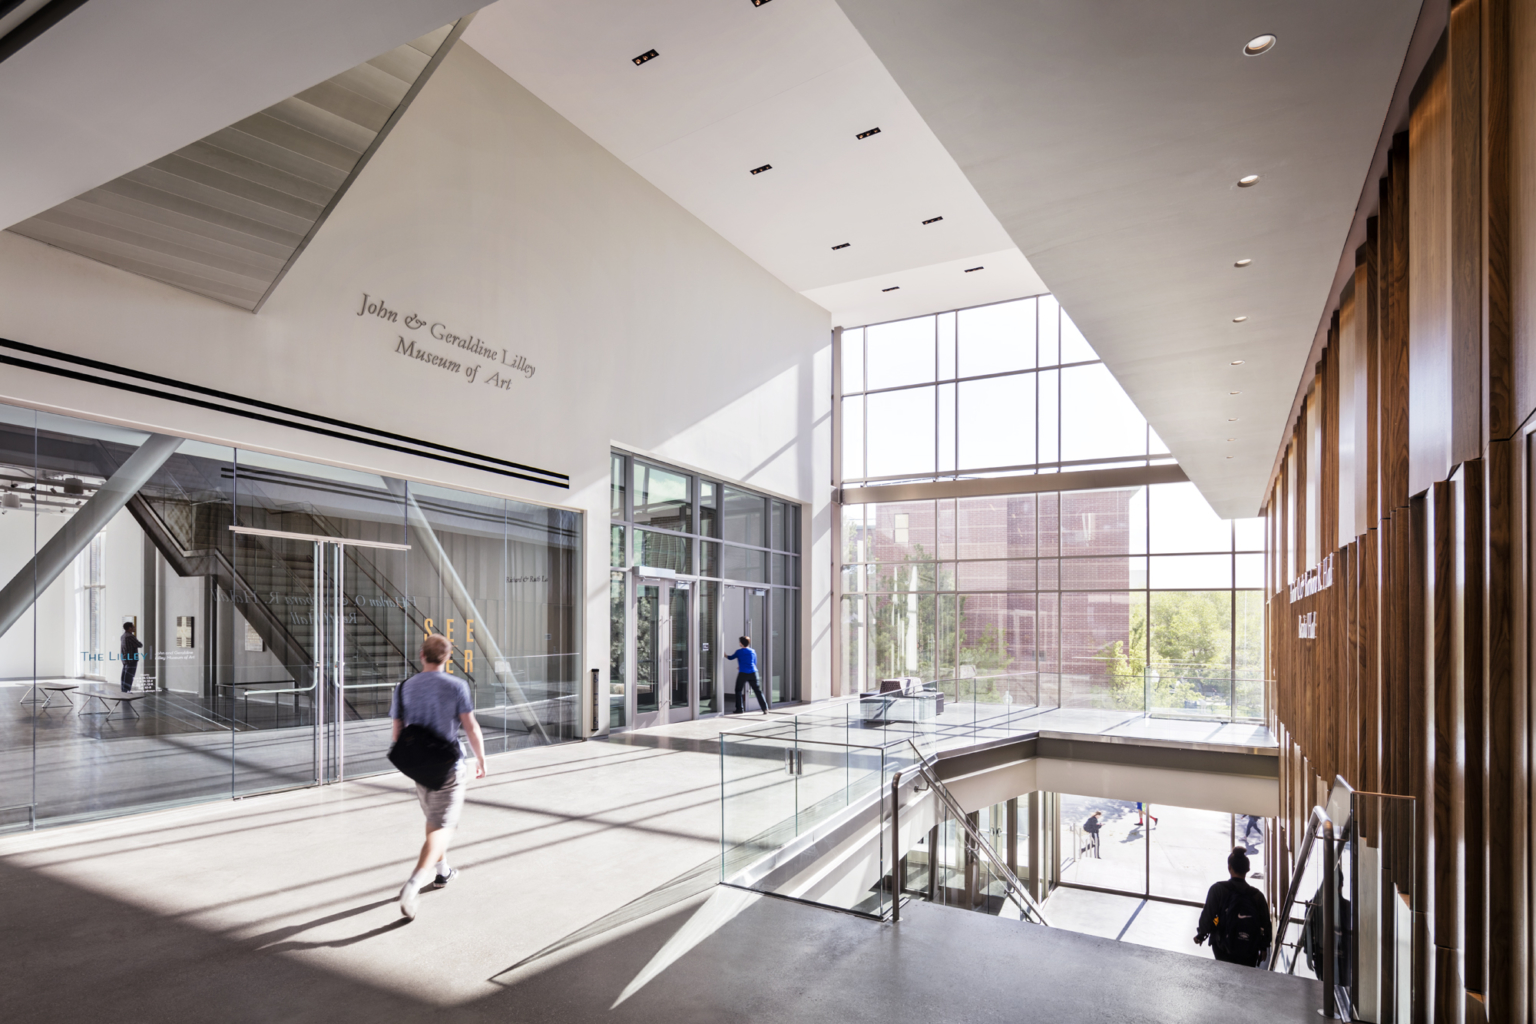 Student walking through art gallery space with open atrium and floor to ceiling windows at the University of Nevada, Reno University Arts Building